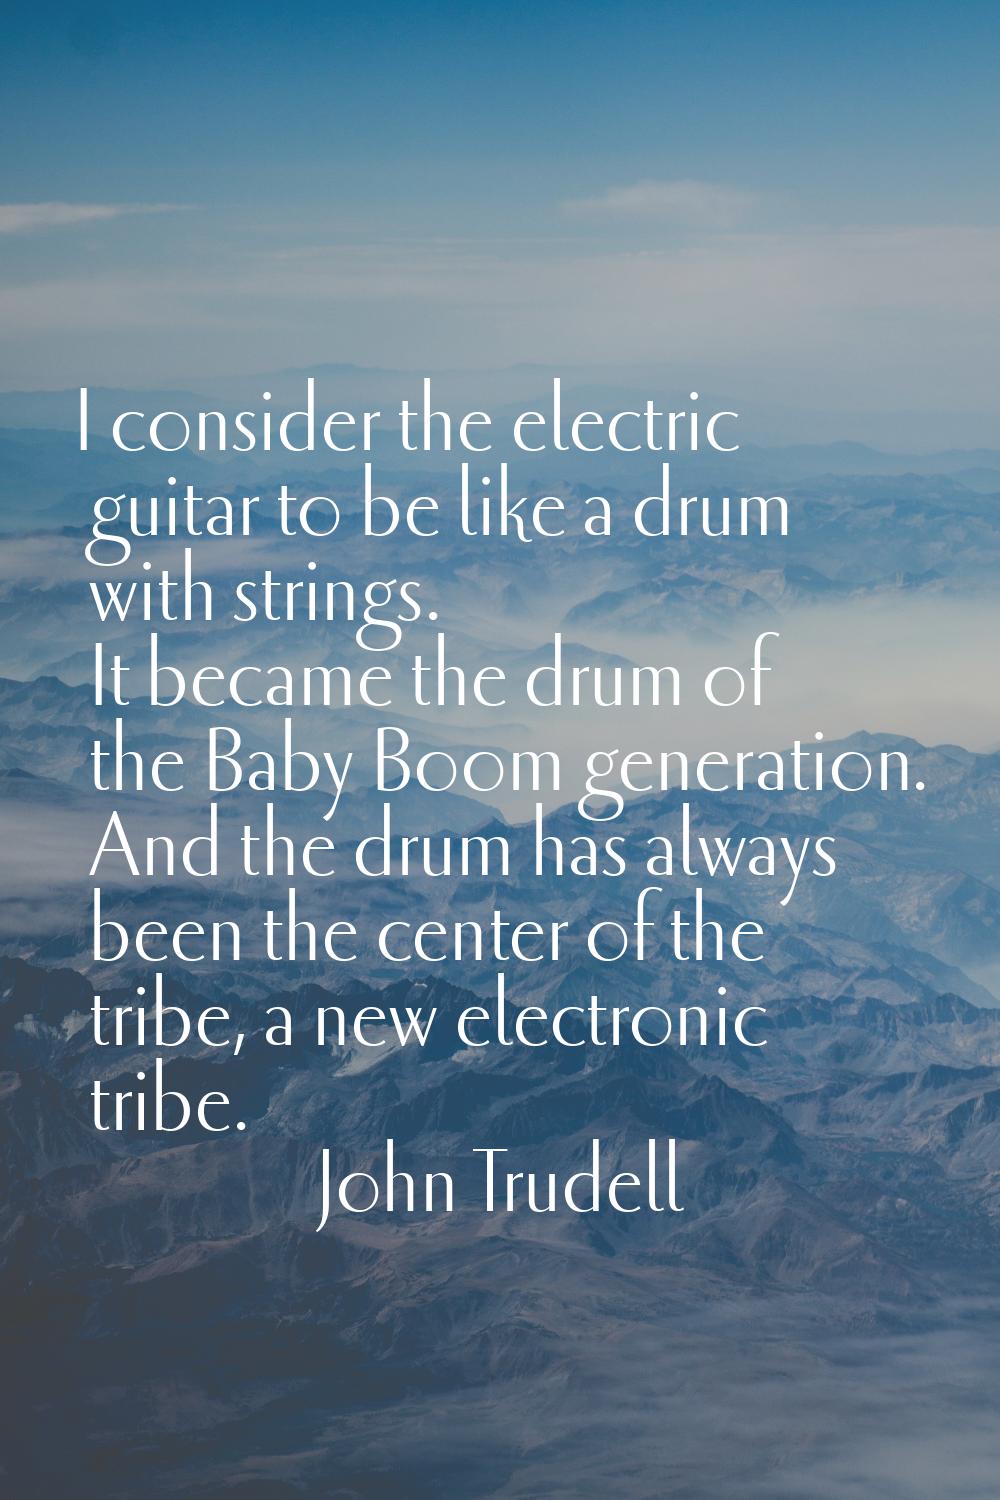 I consider the electric guitar to be like a drum with strings. It became the drum of the Baby Boom 